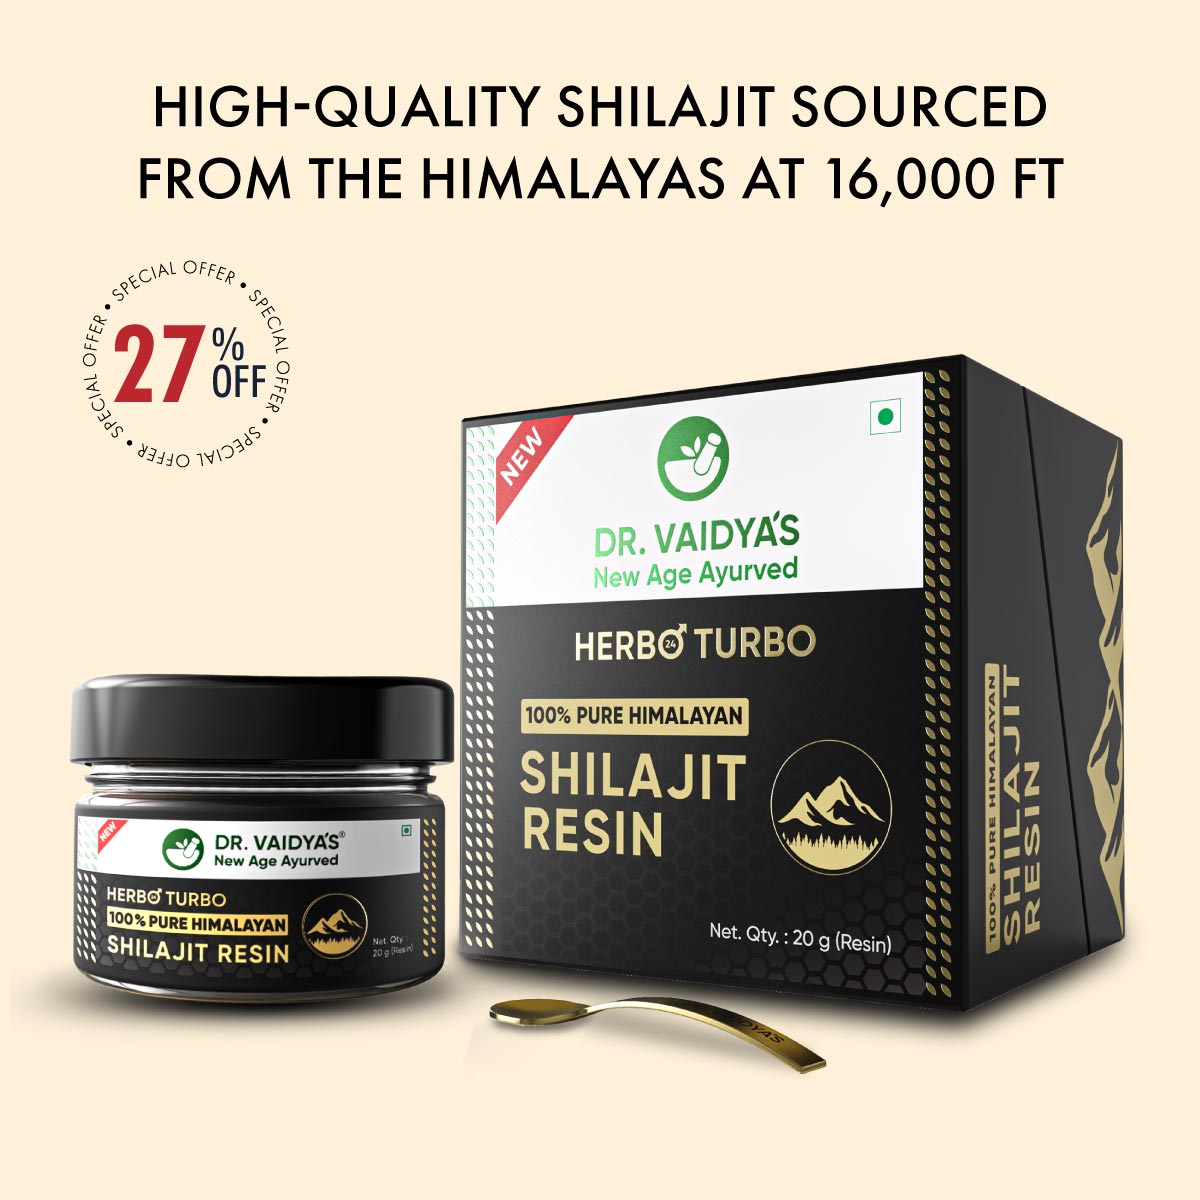 Herbo24Turbo Shilajit Resin: Made From 100% Pure Himalayan Shilajit To Help Boost Stamina, Strength & Energy